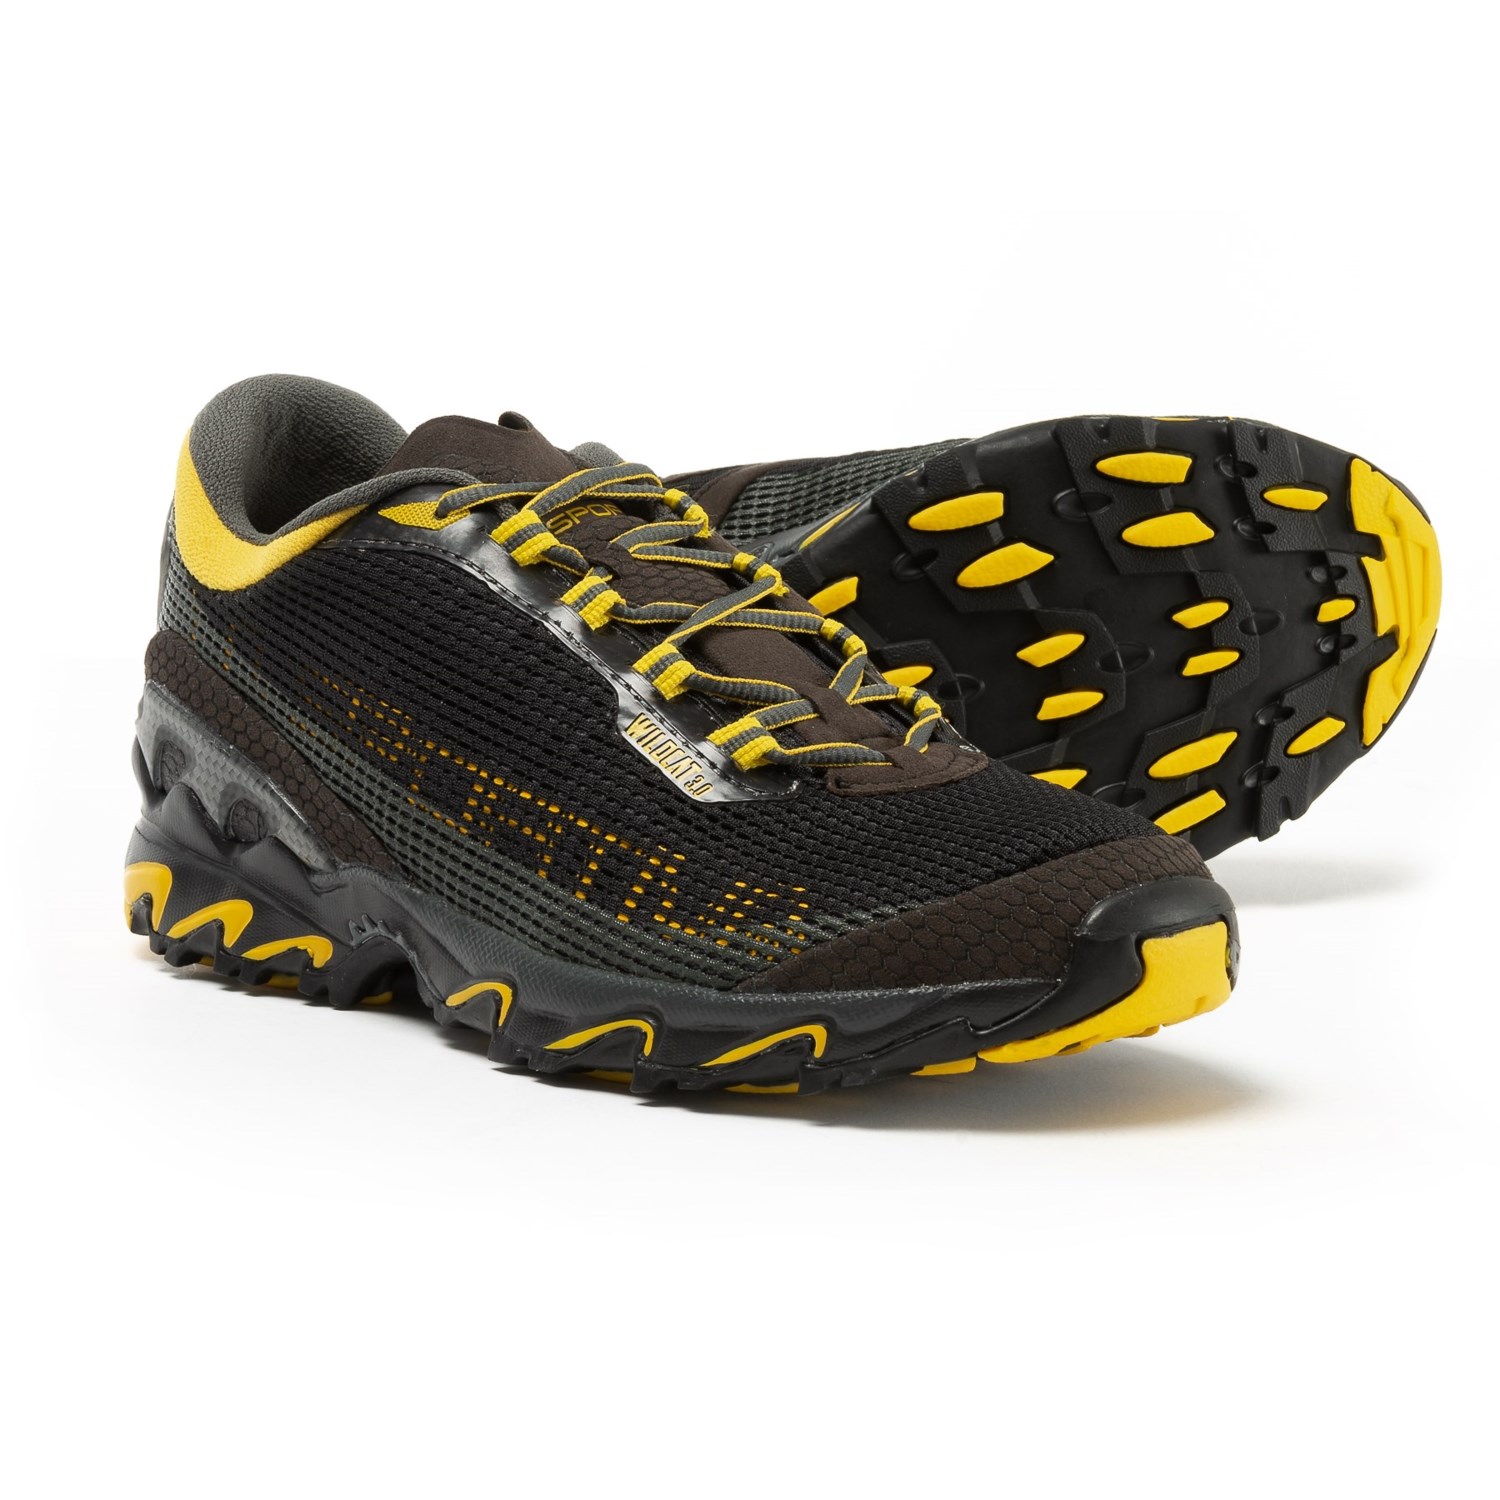 La Sportiva Wildcat 3.0 Trail Running Shoes (For Men) - Save 39%